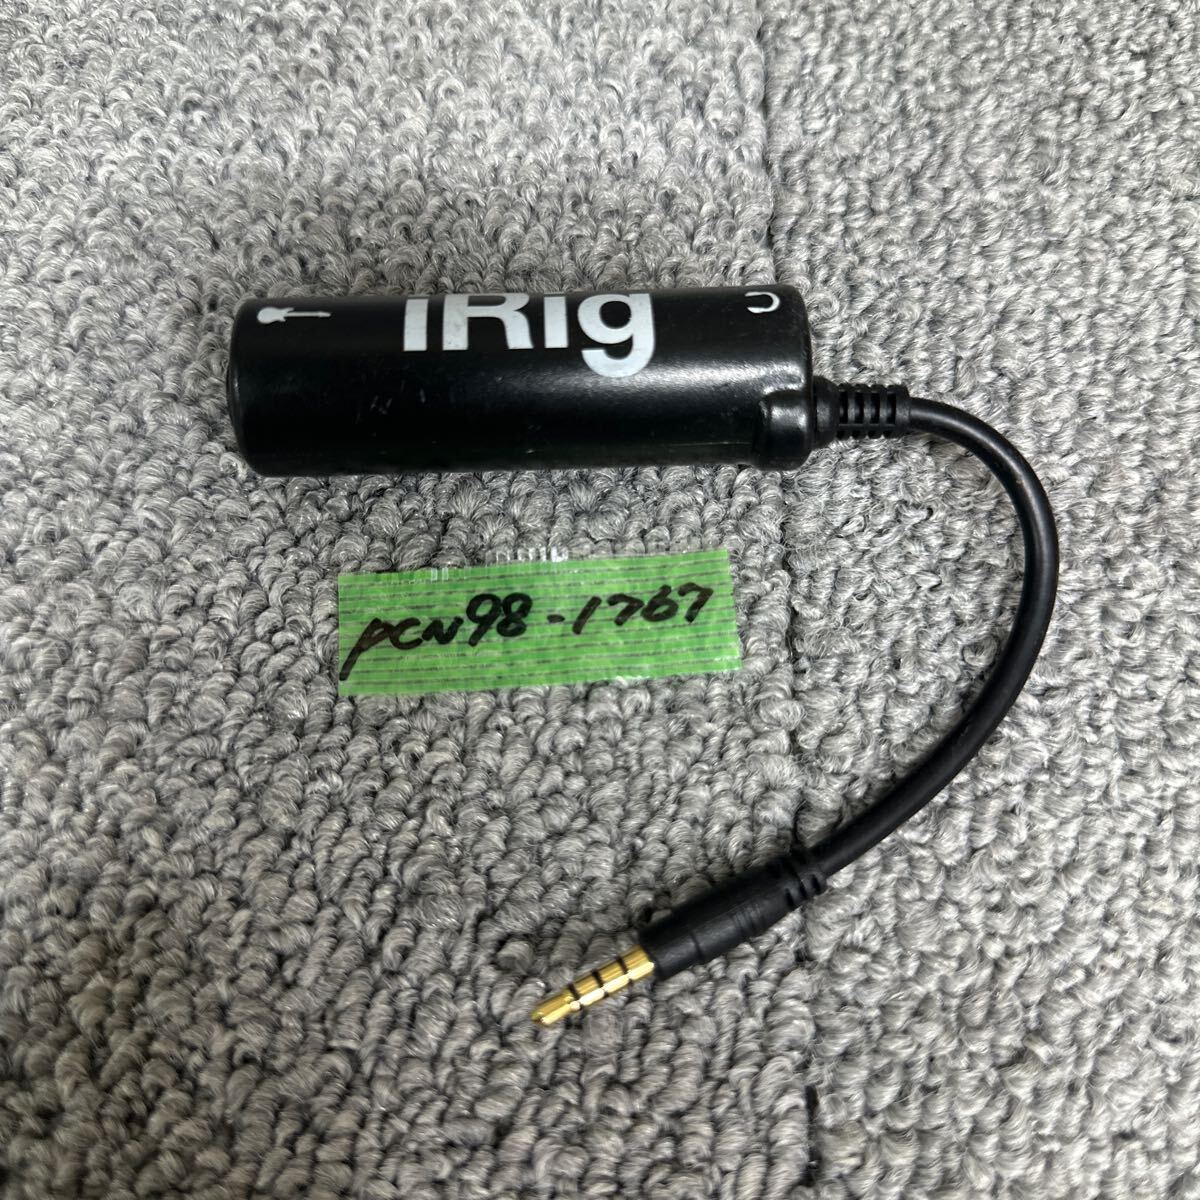 PCN98-1767 super-discount iRig guitar base musical instruments connection iPhone iPod interface multimedia used present condition goods 